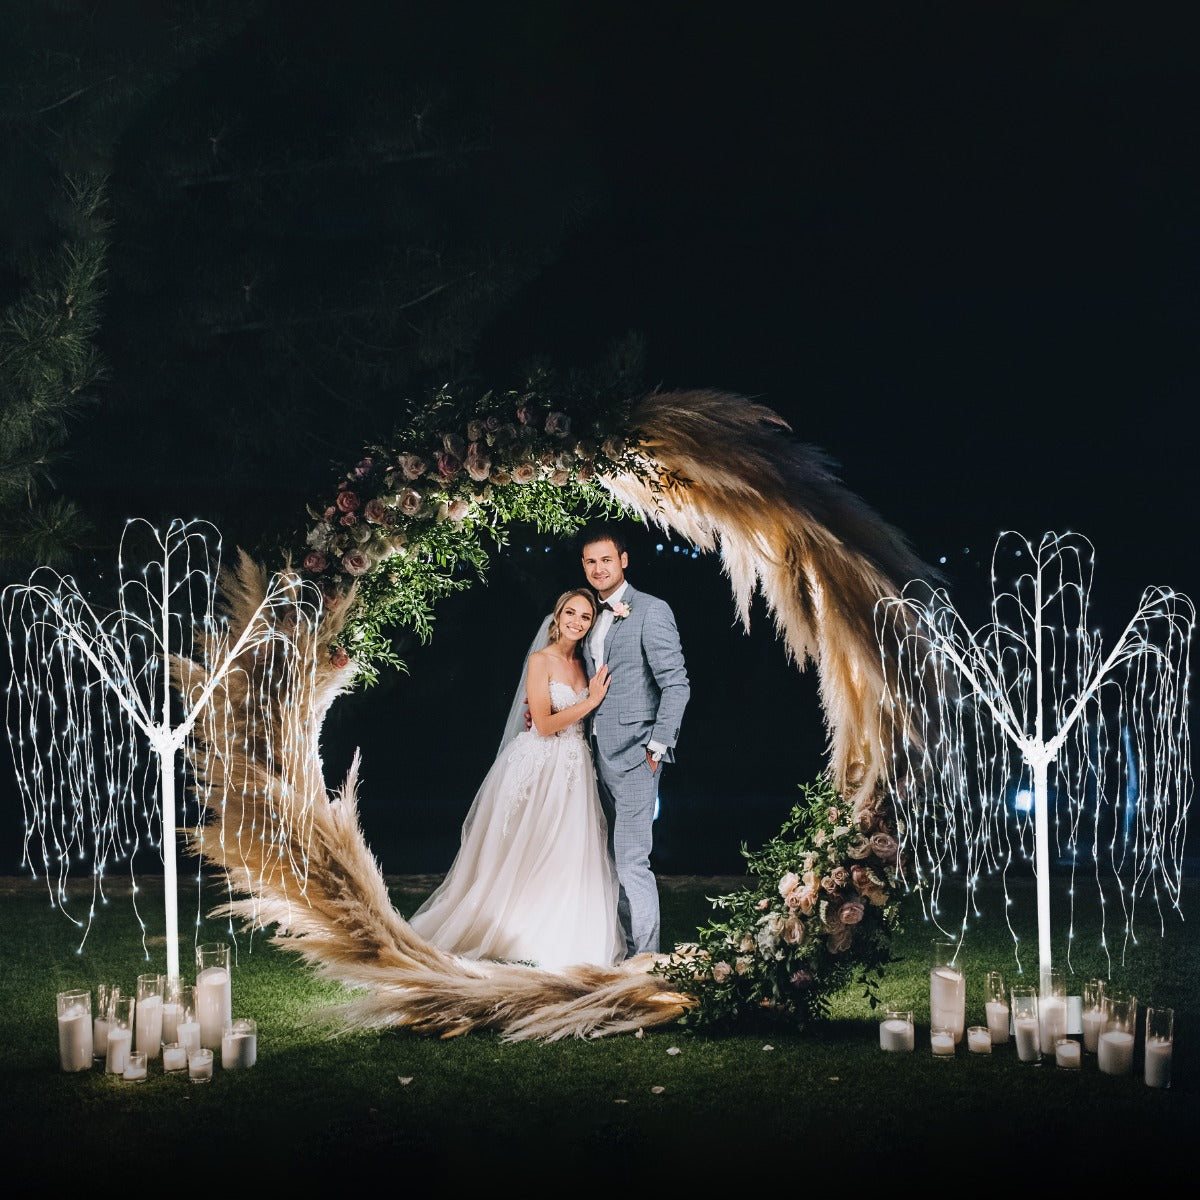 Wedding Moongate - Silver & 2 x Weeping Willow Tree 240cm Cool White